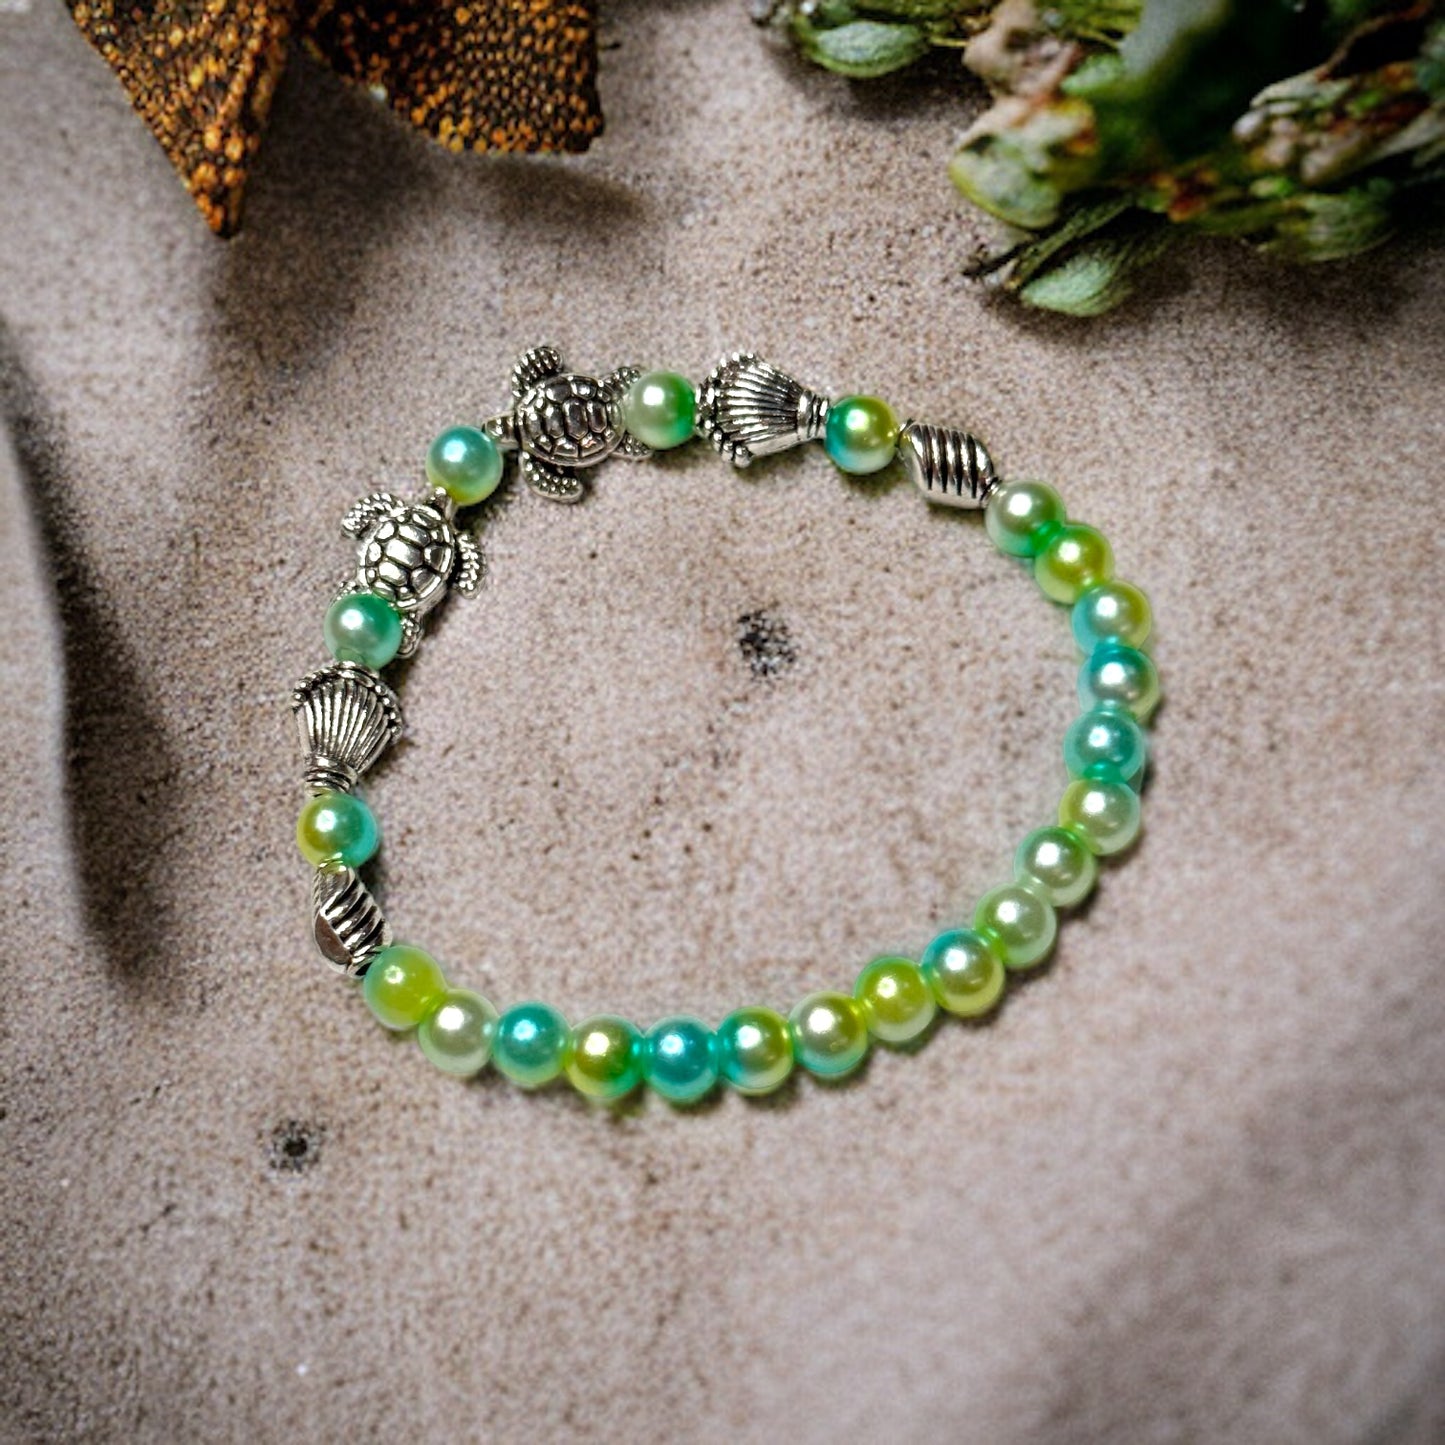 Blue & Green Gradient Beaded Stretch Bracelet with Sea Turtle Accents